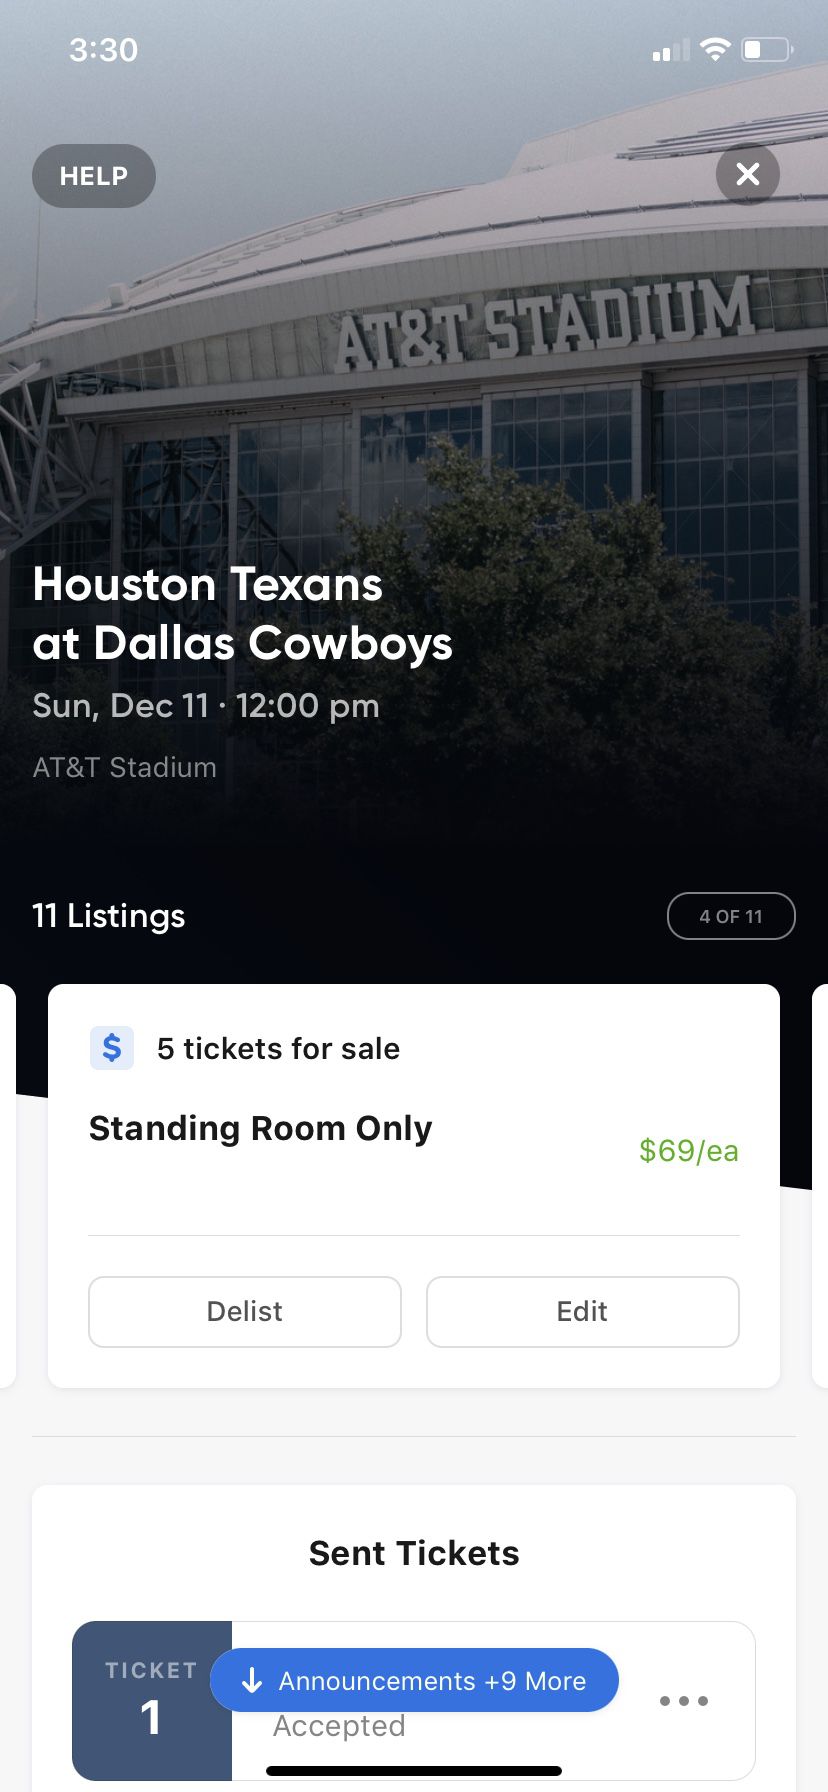 Many Great Options For Houston Texans @ Dallas Cowboys Tickets & Parking